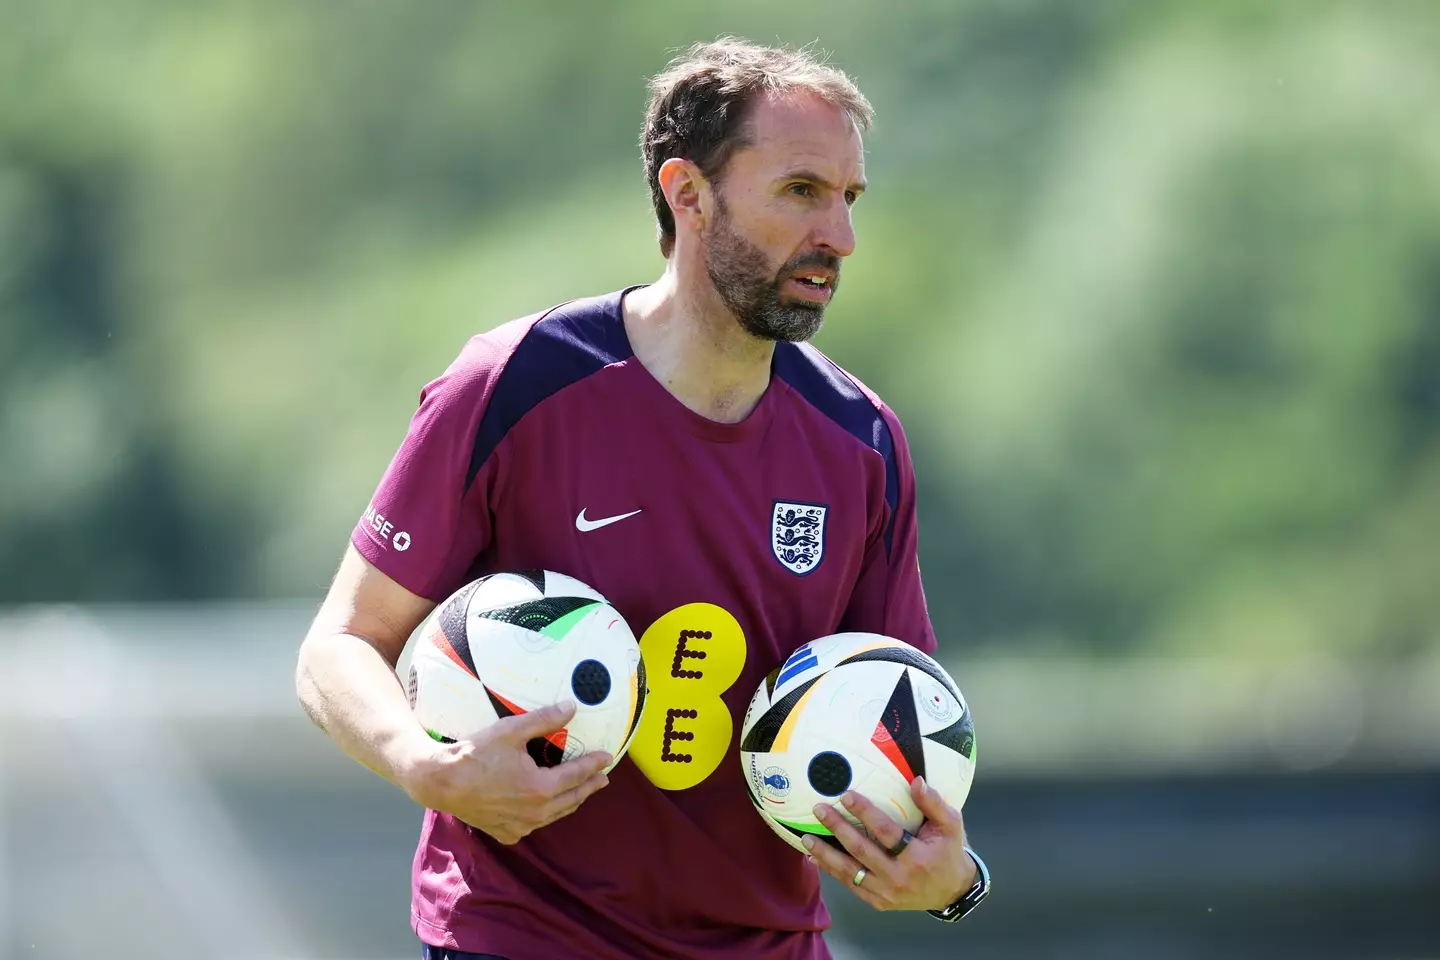 Southgate's England side are among the favourites for this summer's Euros (Getty)